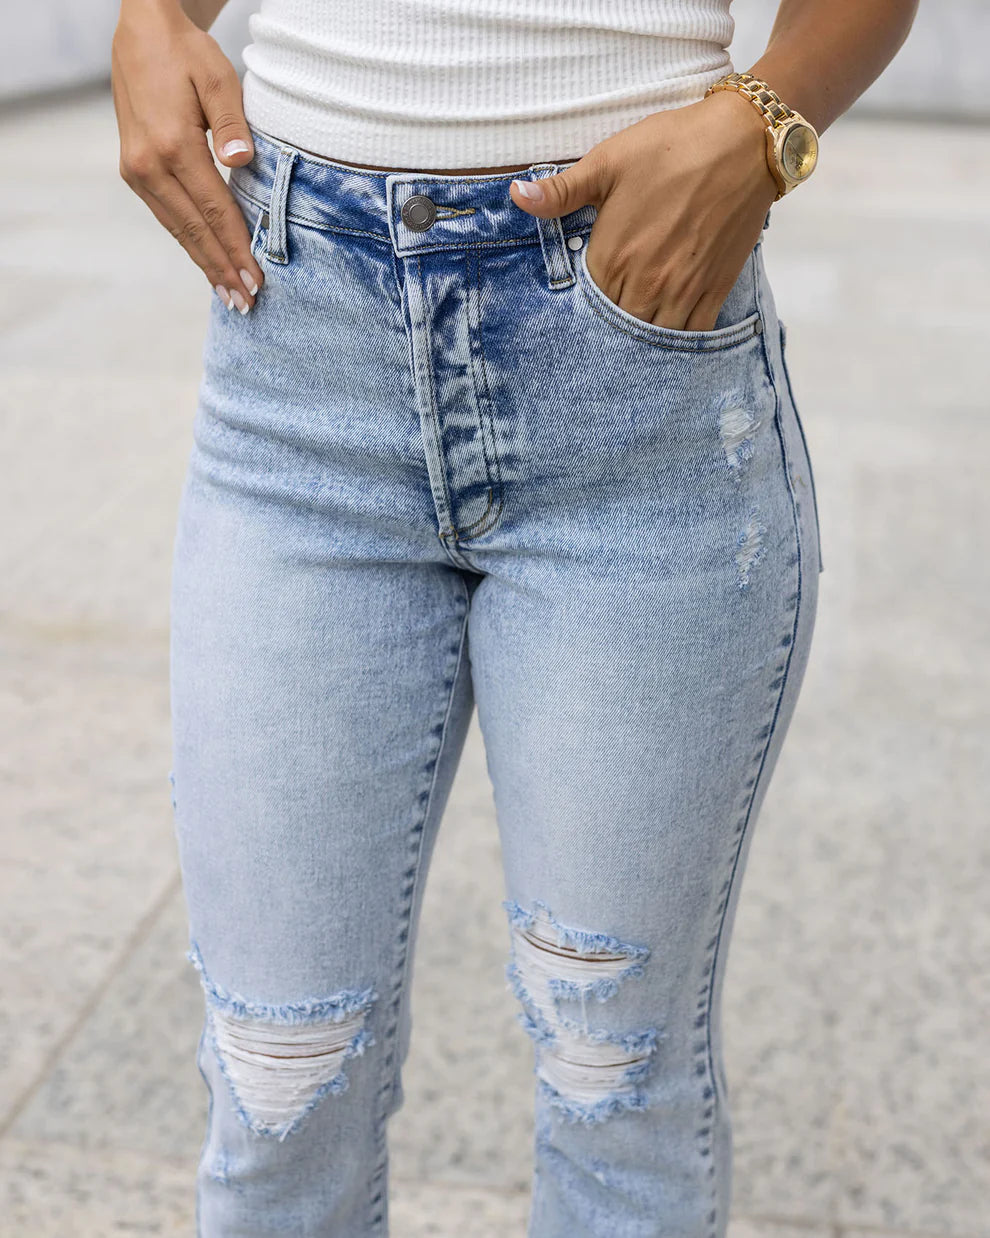 Premium Denim Jeans in Mid-Wash - Grace and Lace